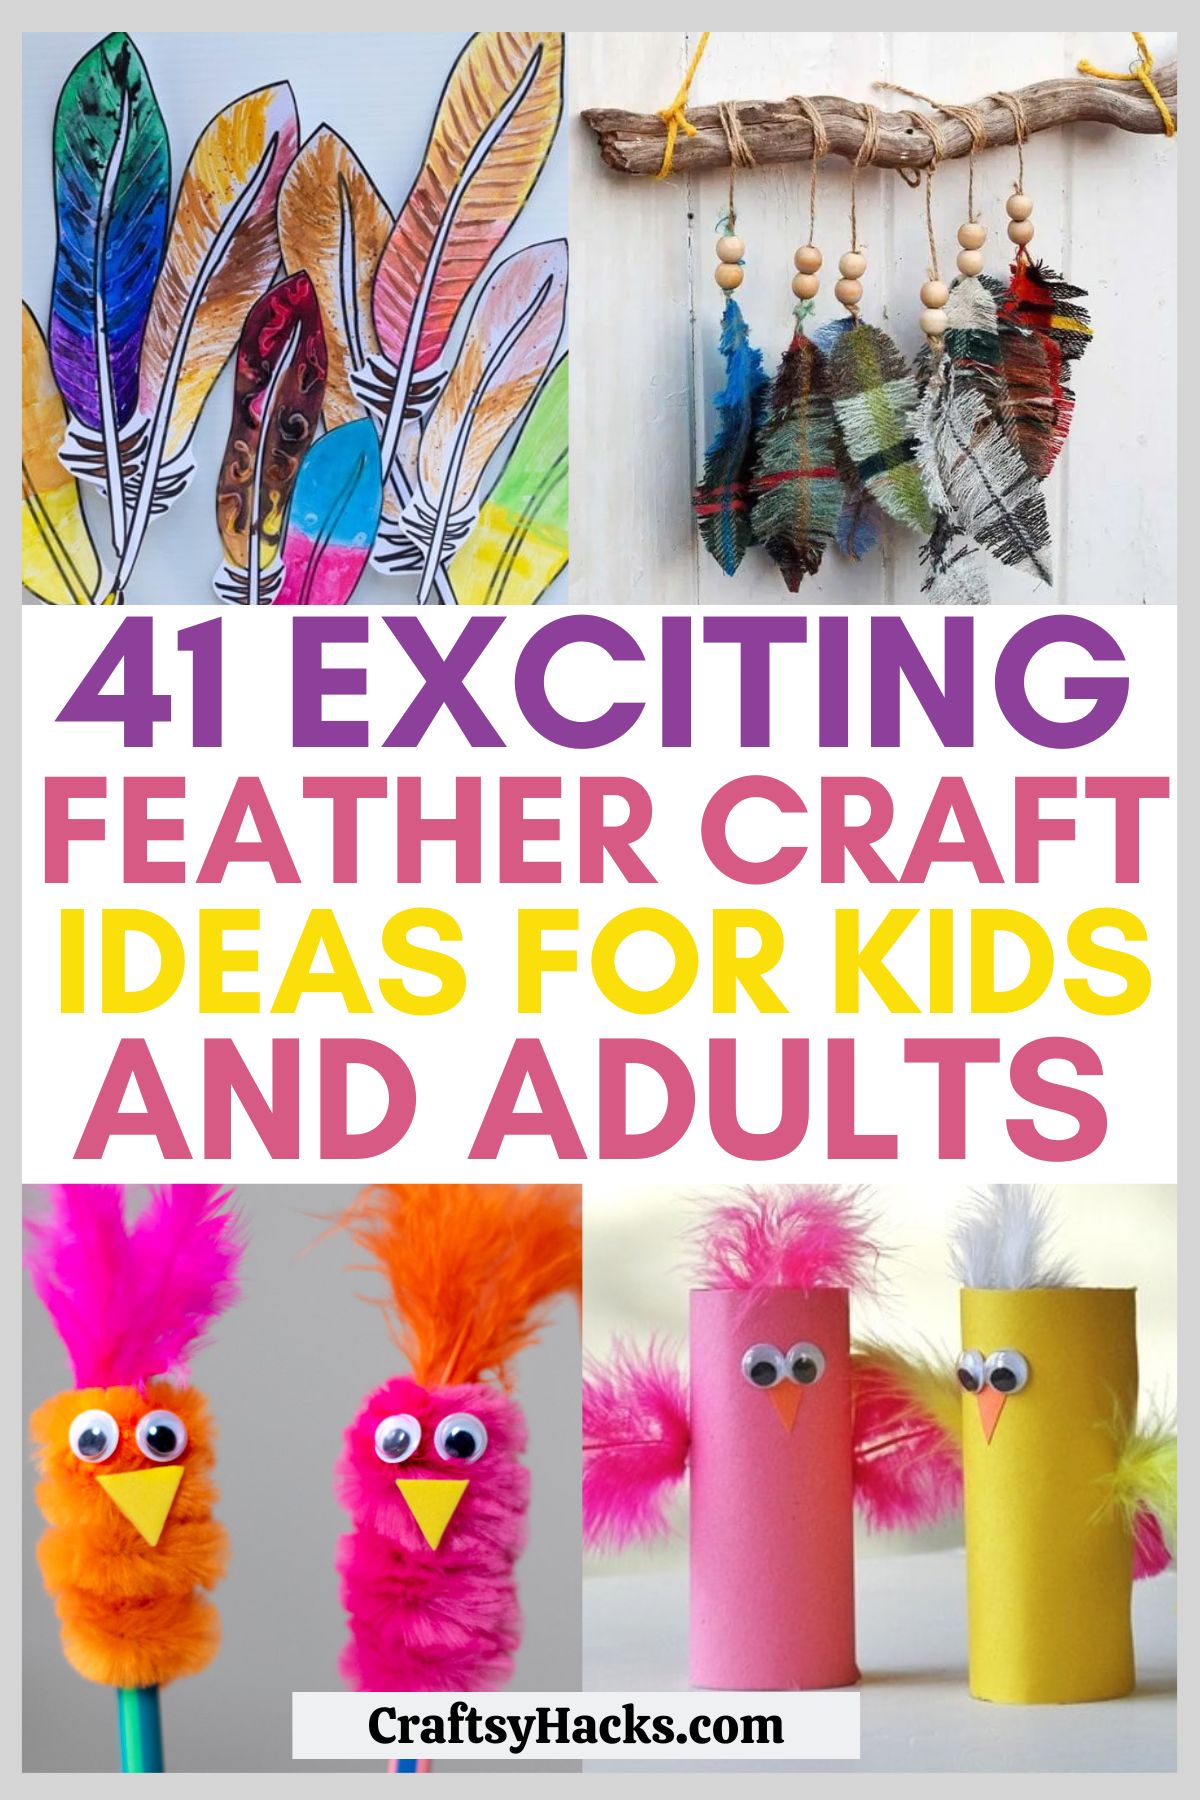  Feather Crafts for Kids and Adults